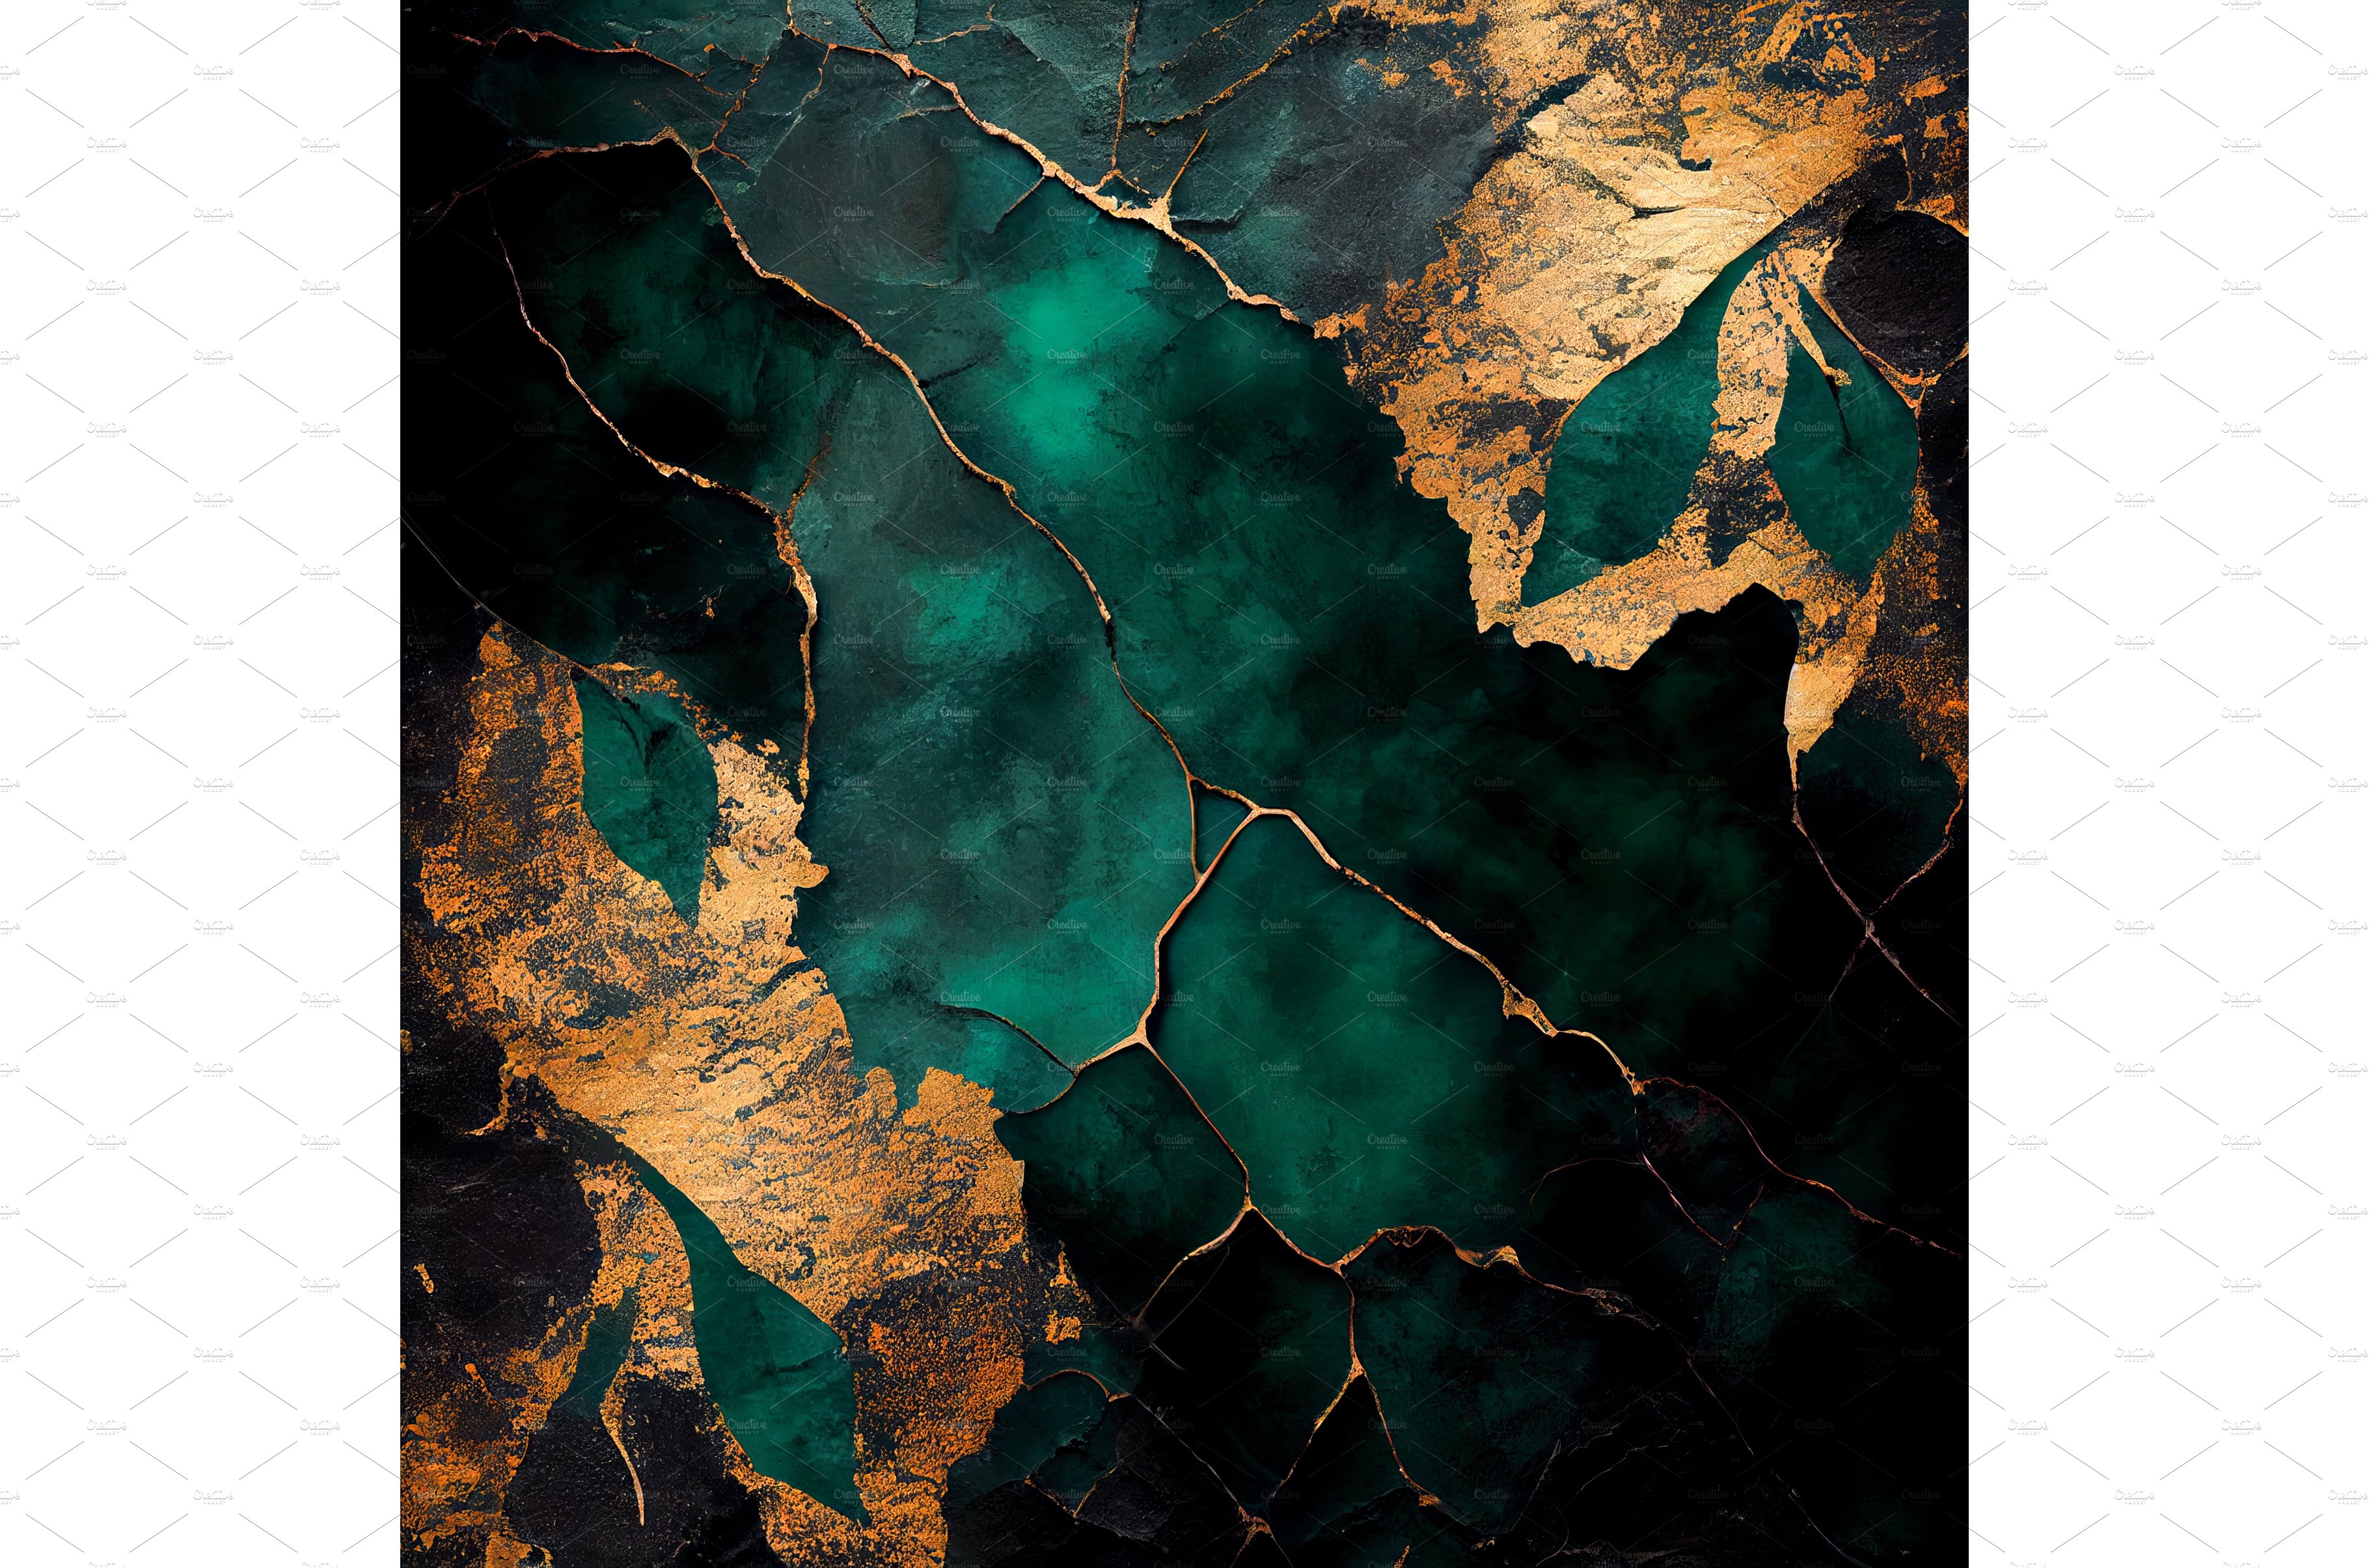 Green and gold venetian plaster cover image.